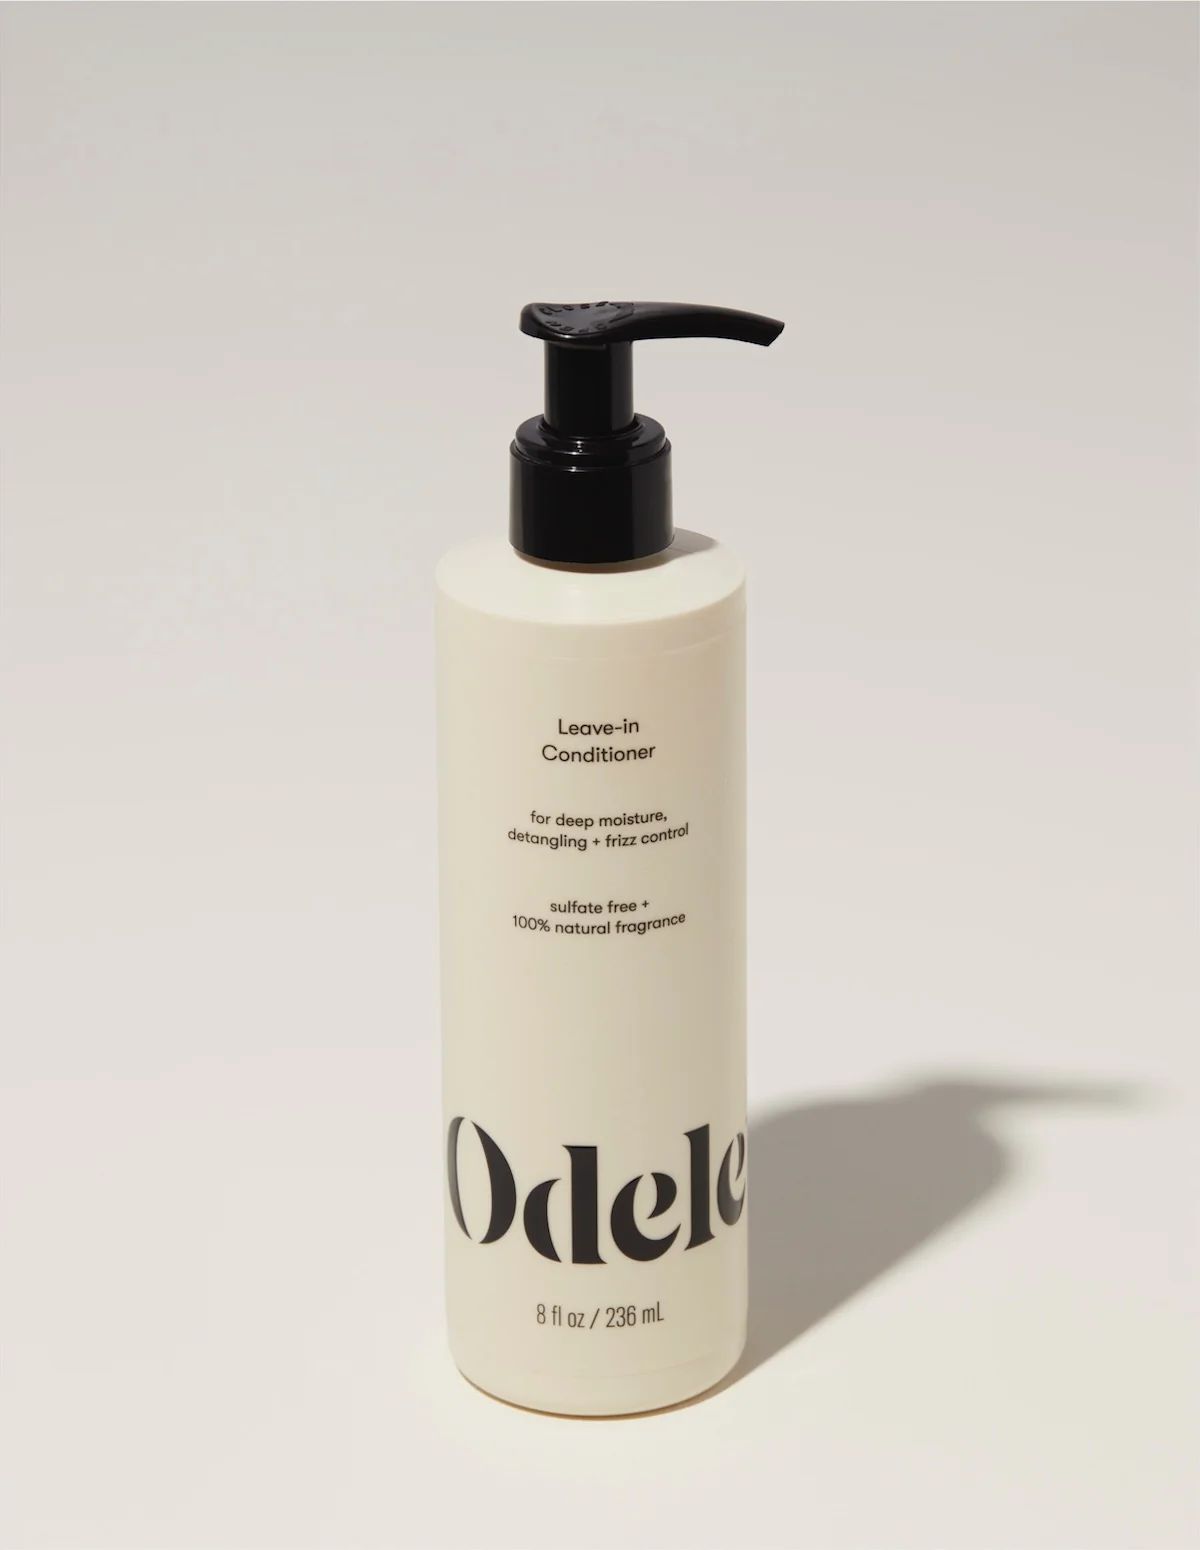 Leave-in Conditioner | Odele Beauty